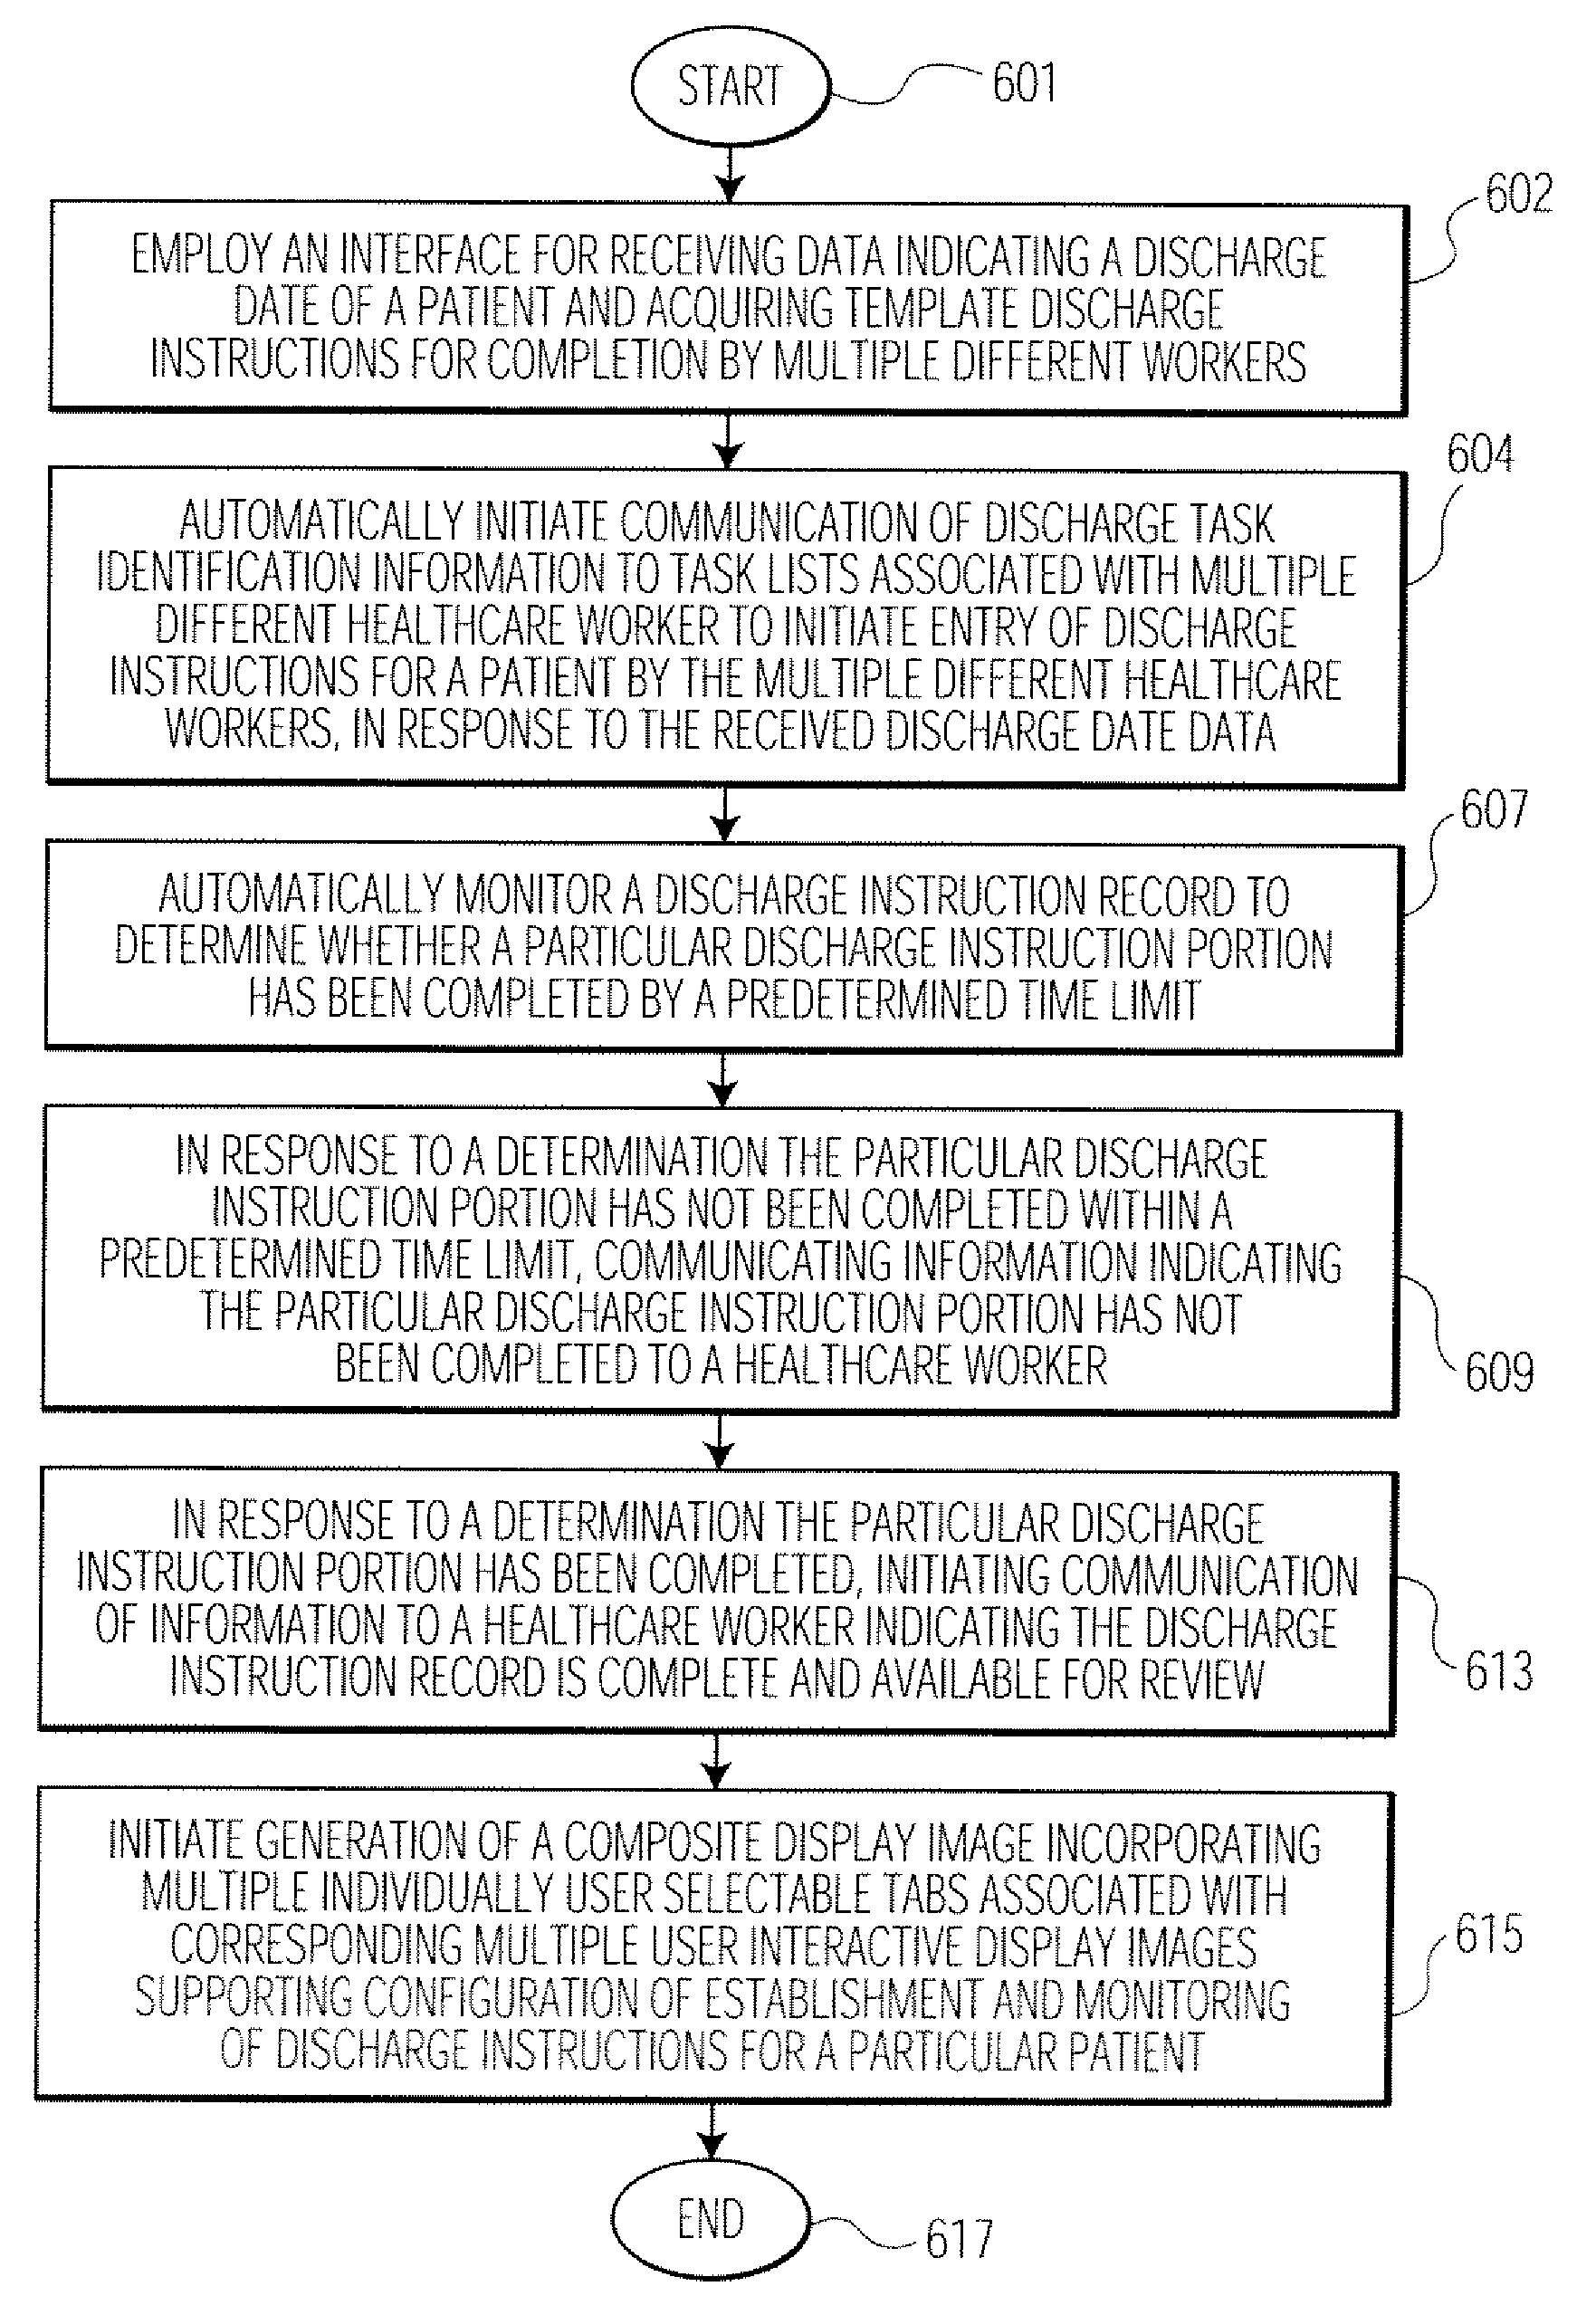 Patient Discharge Data Processing System